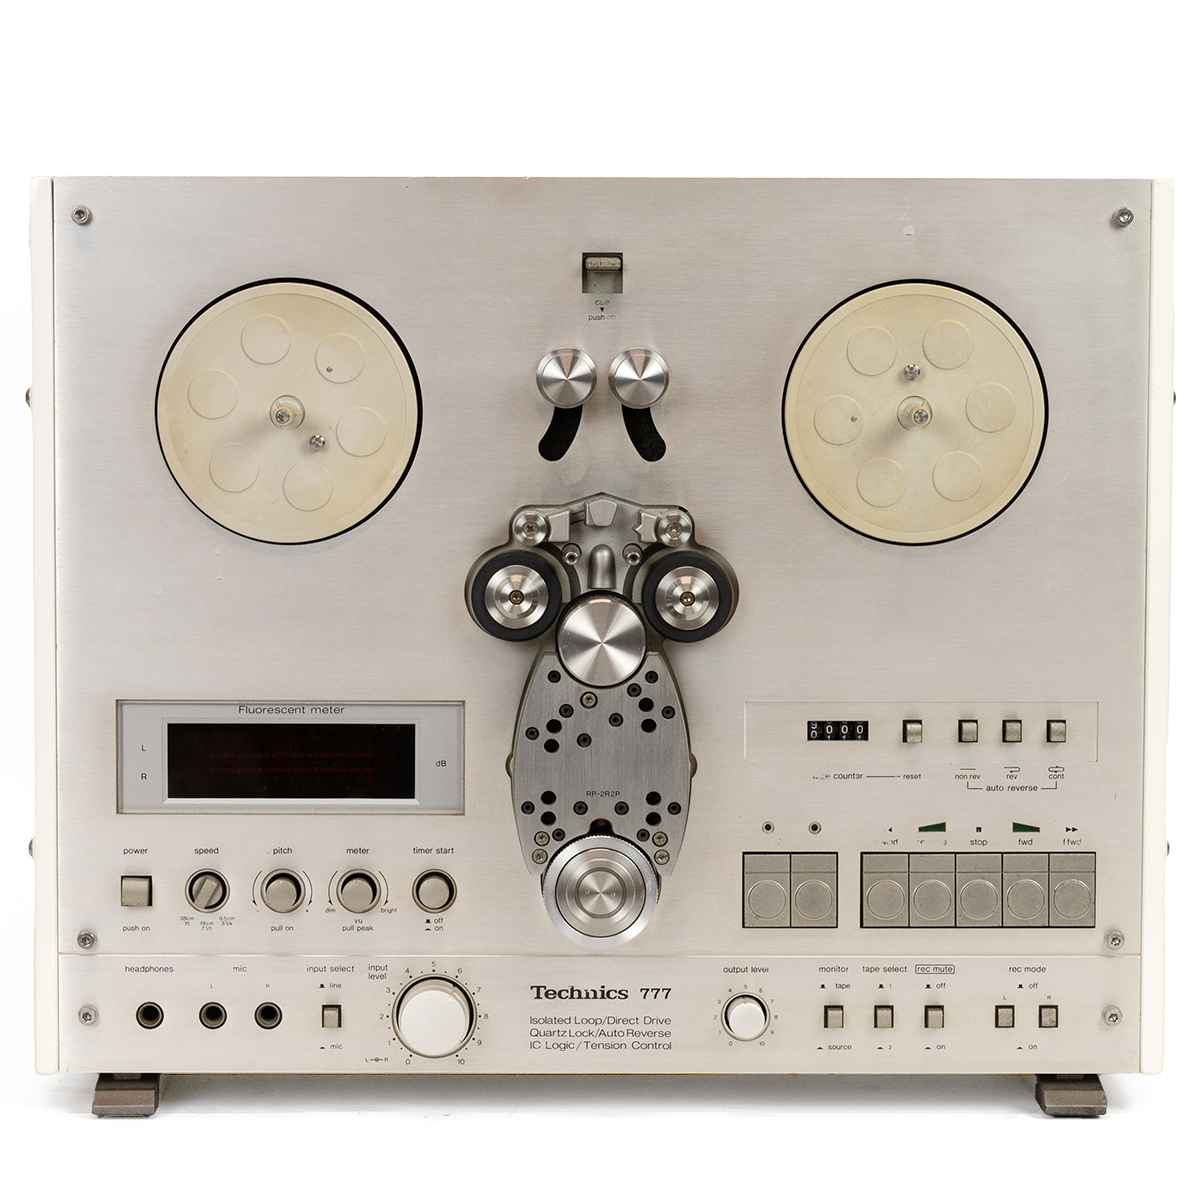 Audio Interest. Vintage Technics RS-777 reel to reel tape player. Isolated loop, direct drive, qu...